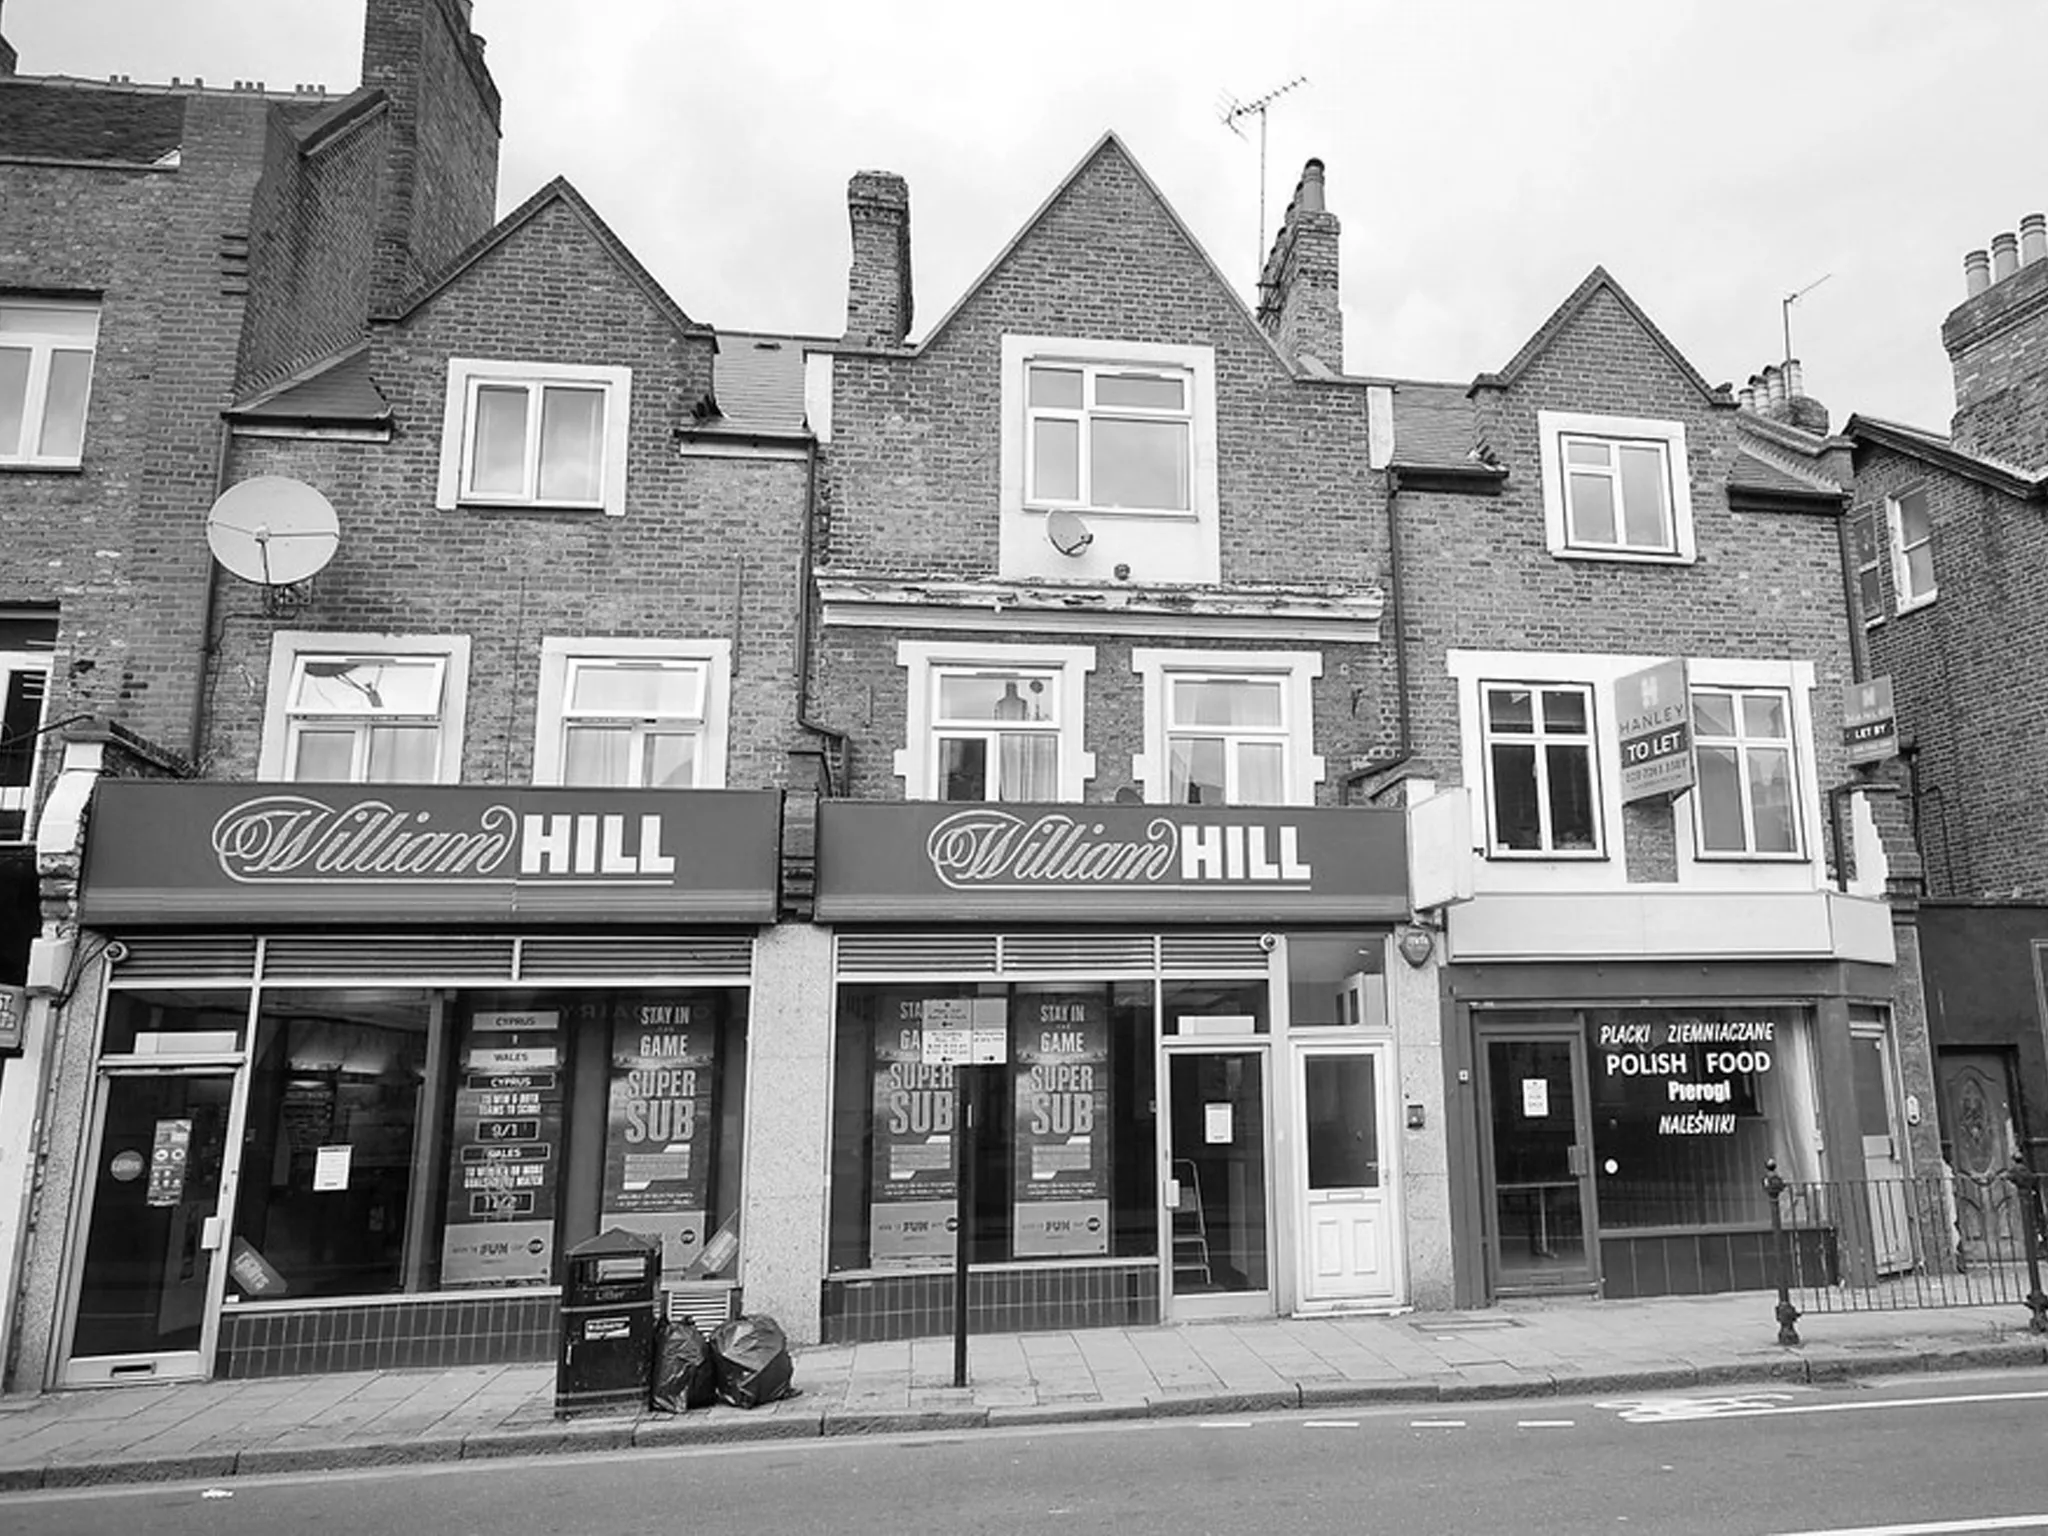 Crouch Hill Pantry - William Hill before black and white